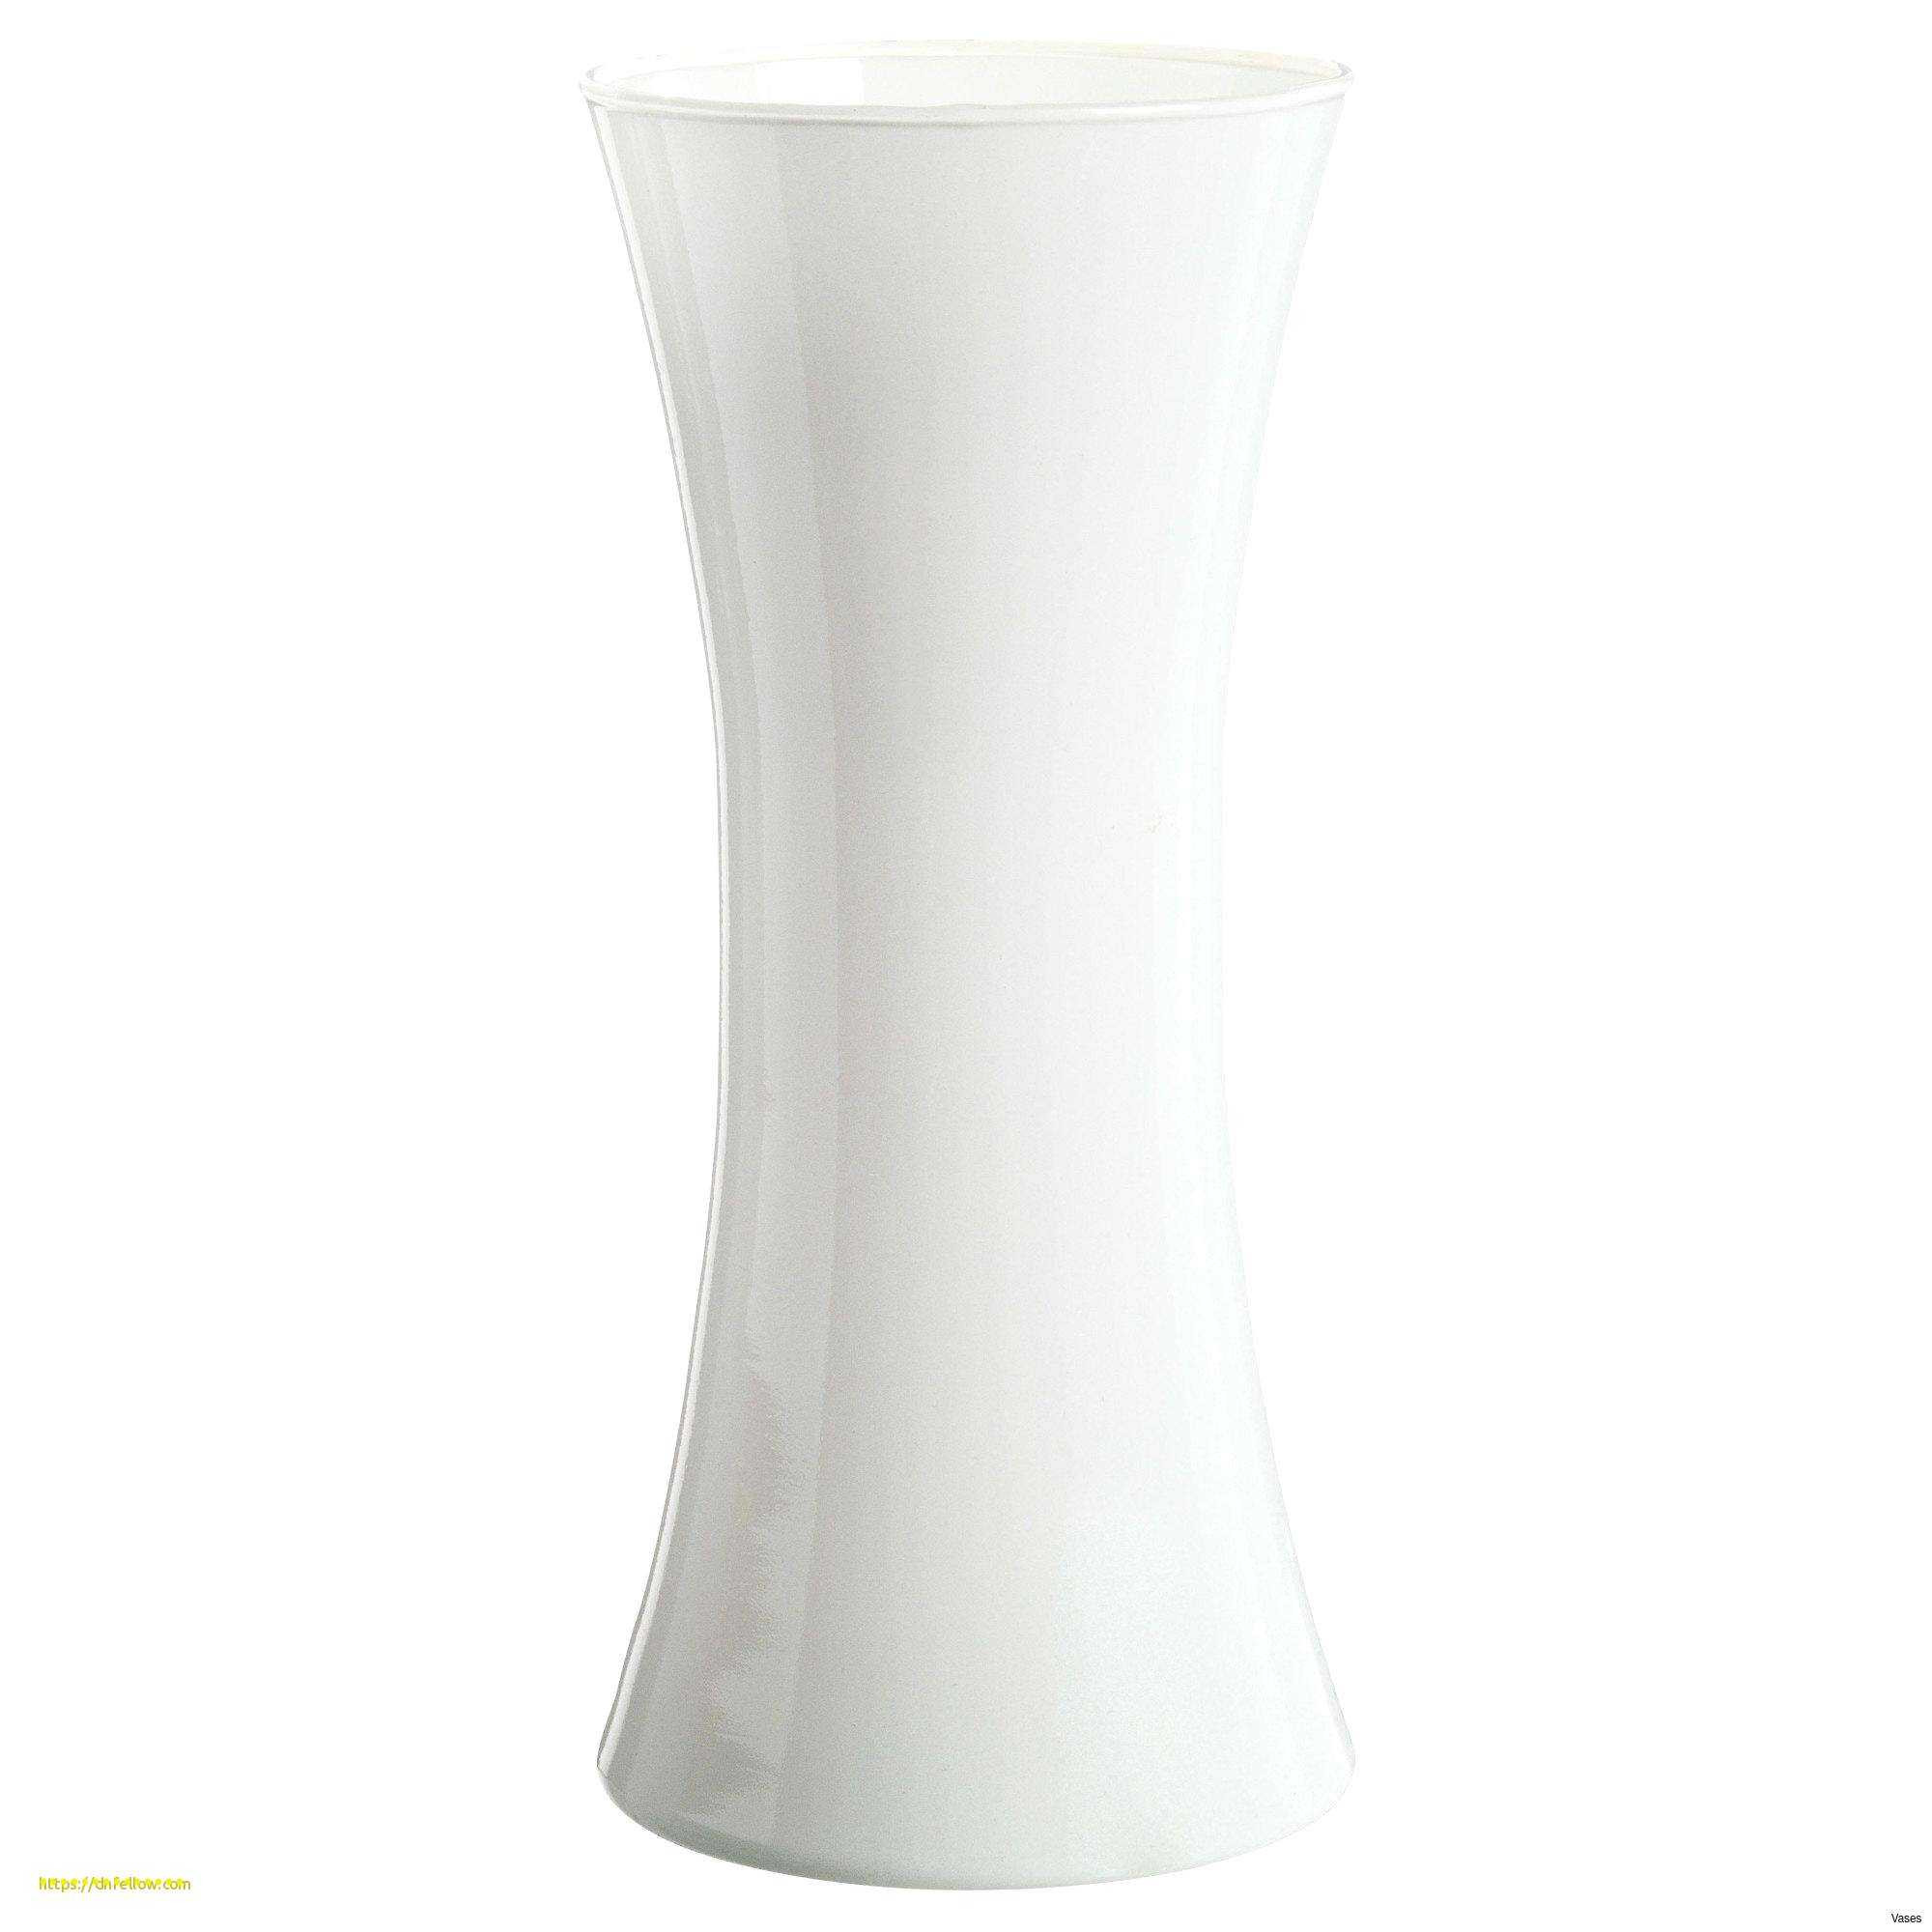 18 Stunning Ikea Glass Flower Vases 2024 free download ikea glass flower vases of luxury floor vase ikea home design within what colors match black and white new living room ikea vases new pe s5h vases ikea